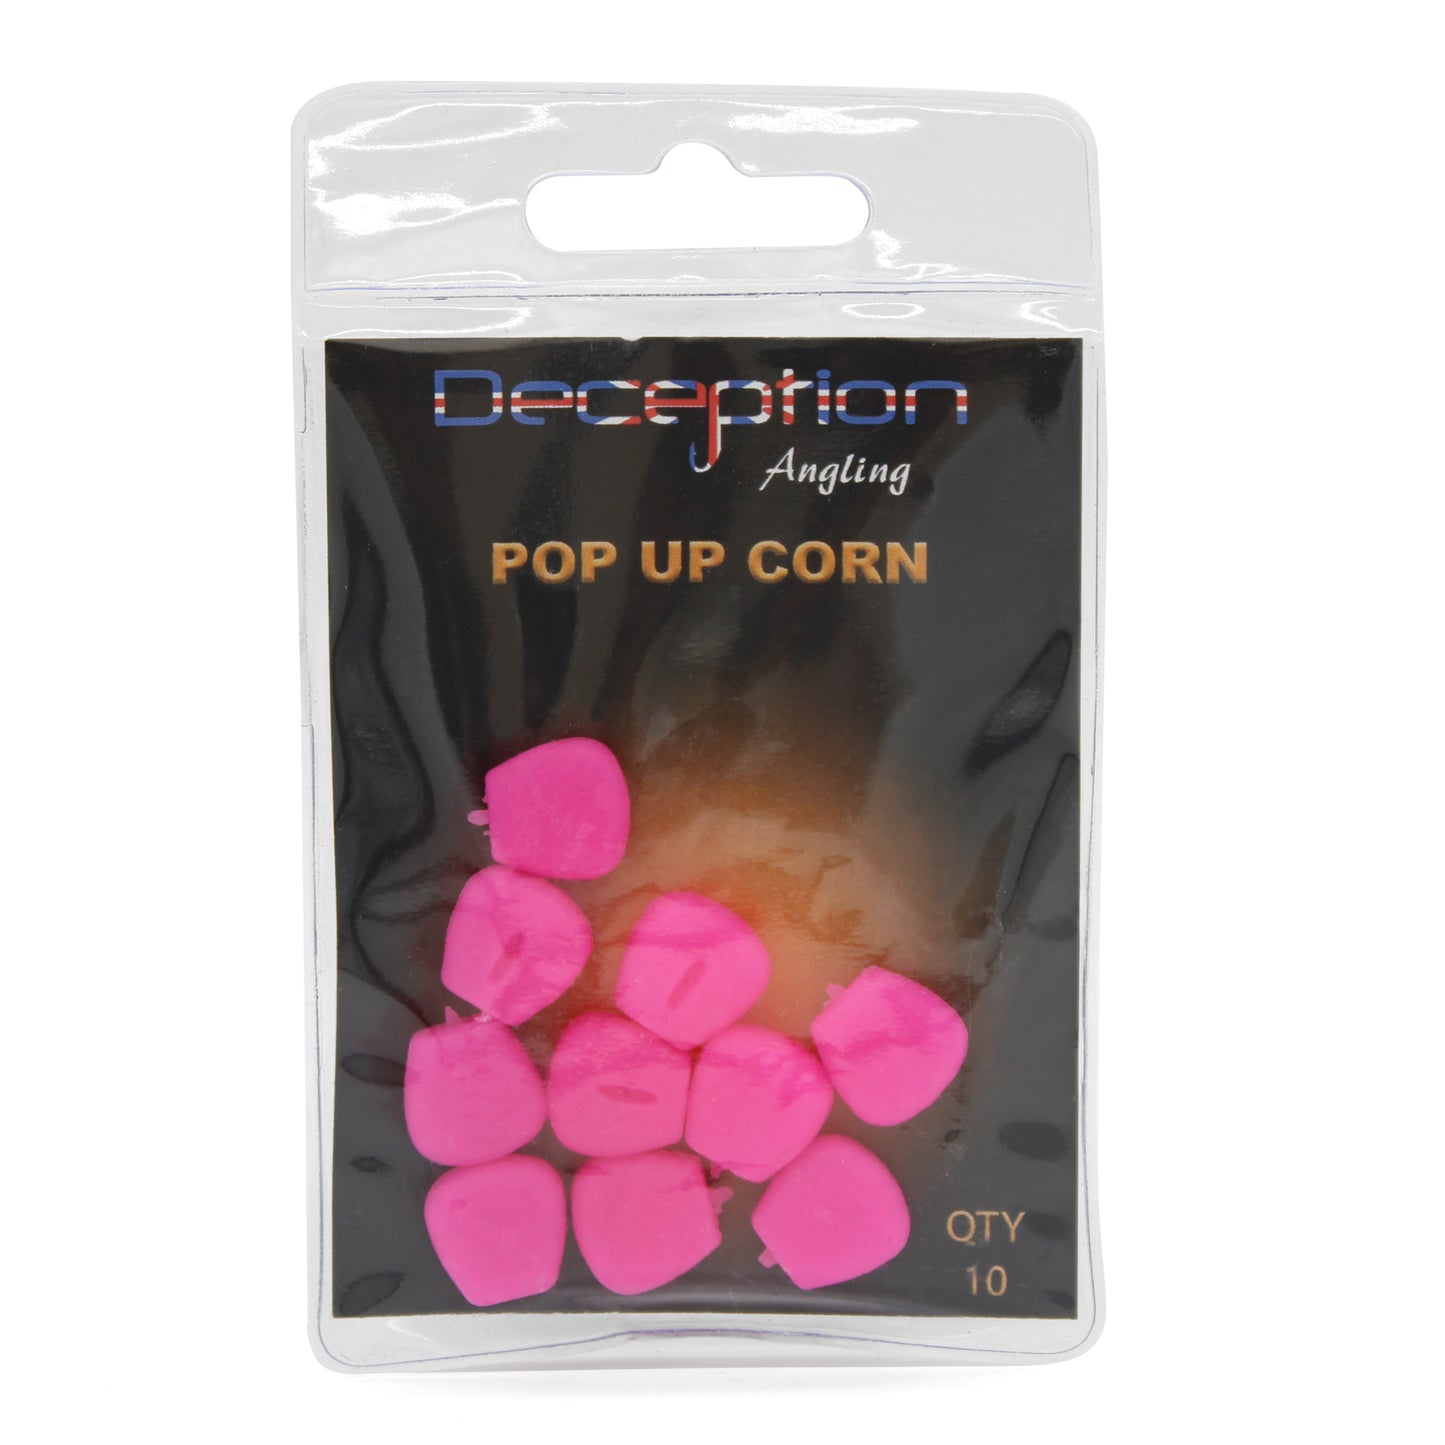 Deception Angling Pop Up Corn for Fishing in Pink